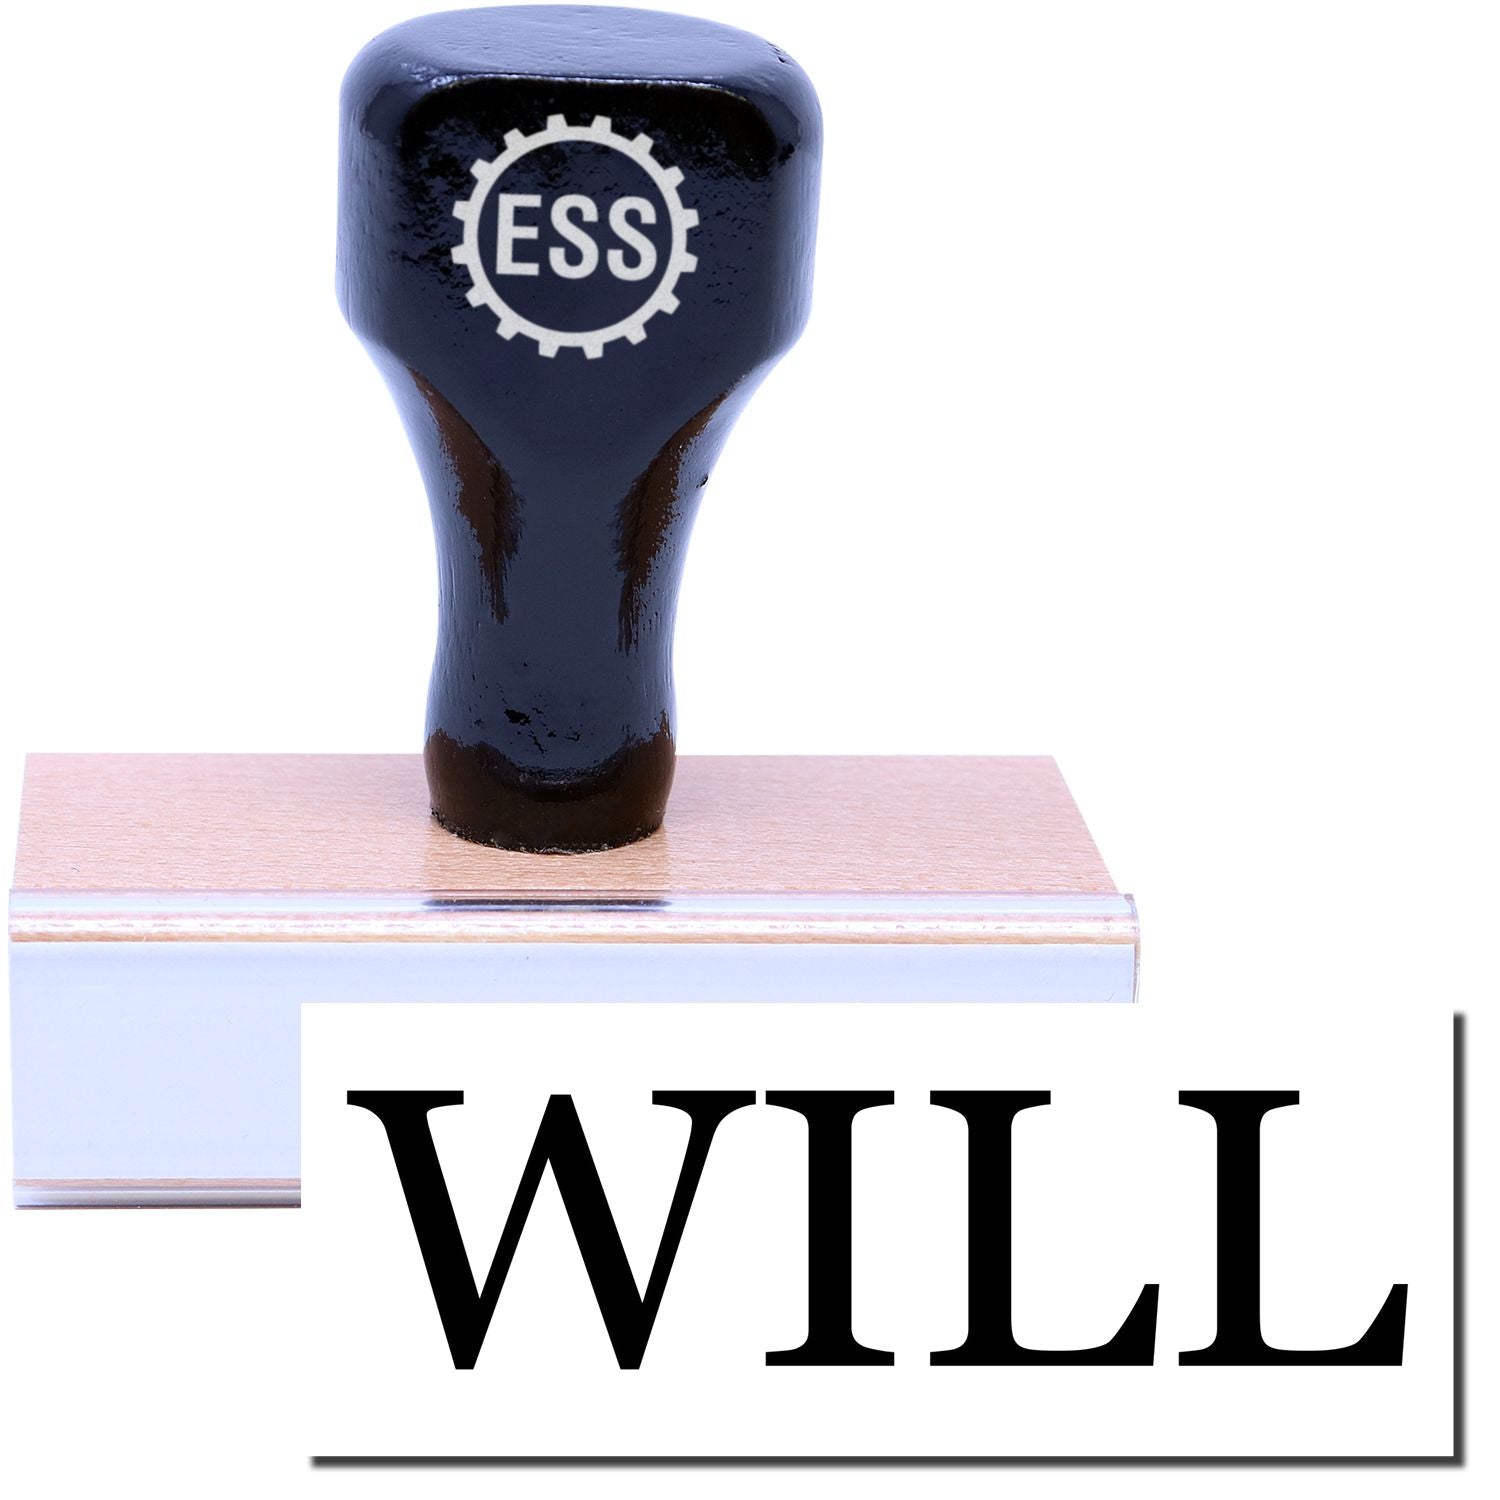 A stock office legal rubber stamp with a stamped image showing how the text "WILL" is displayed after stamping.